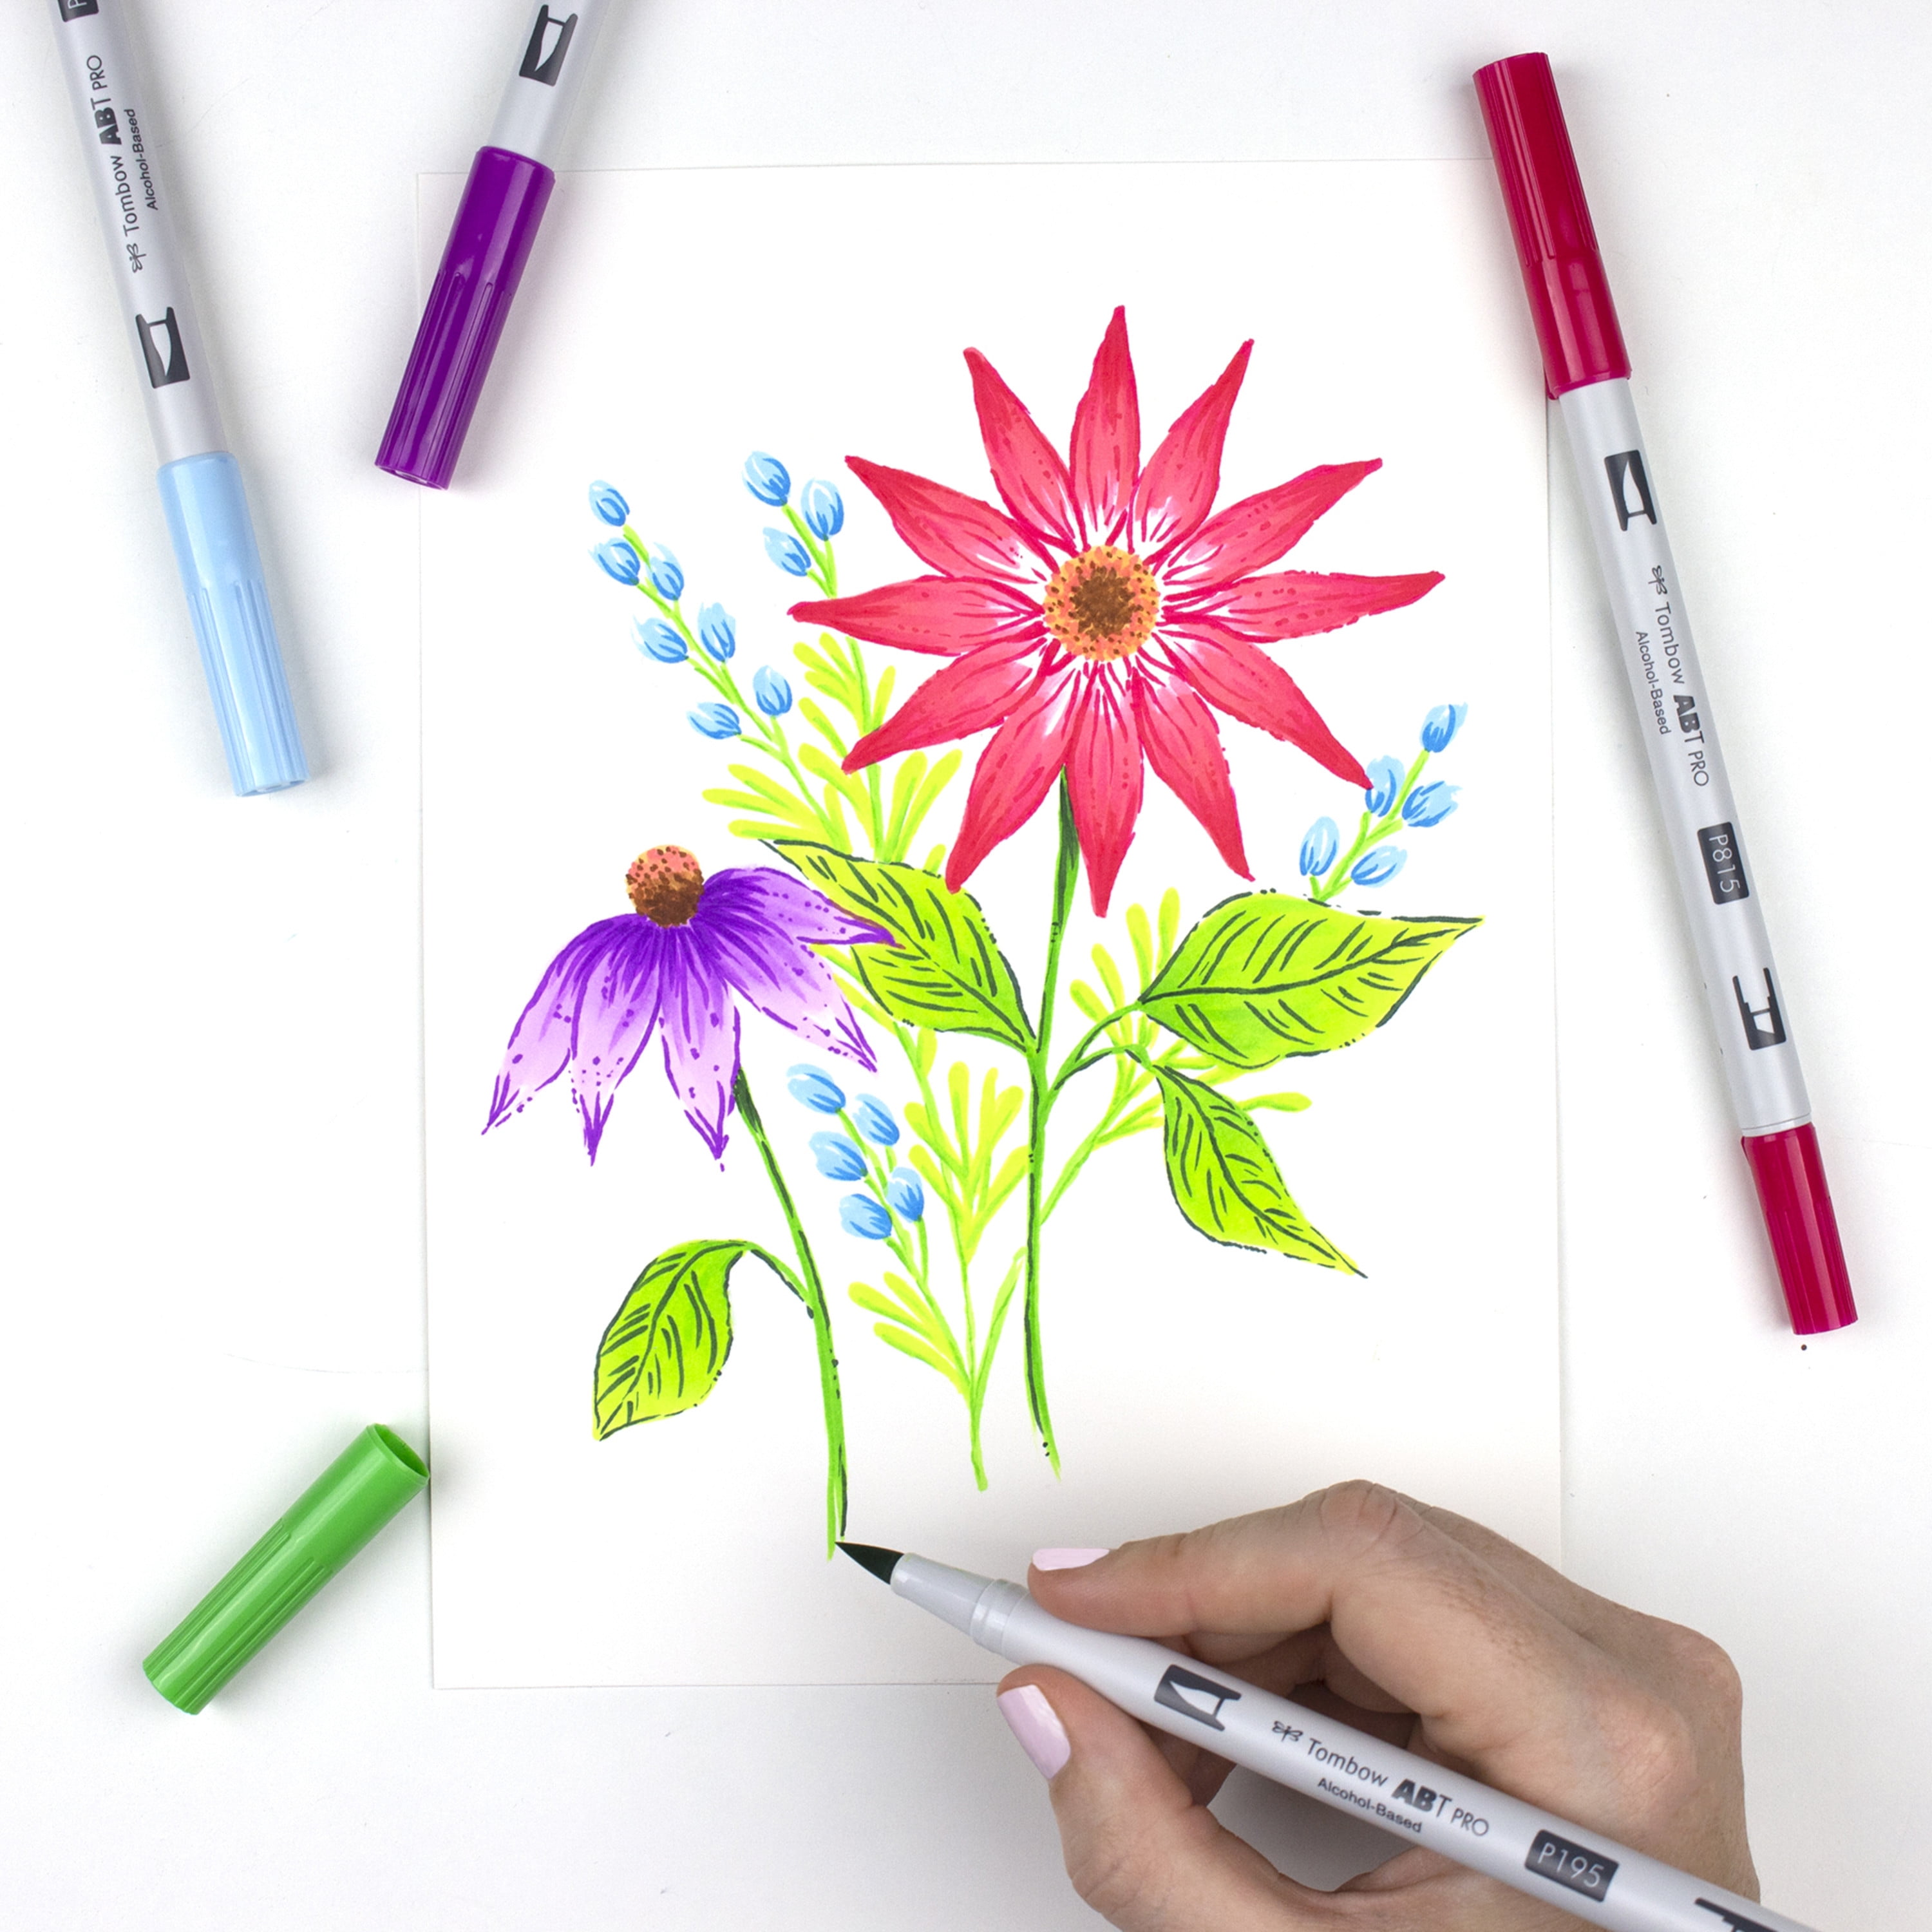 Coloring Resin with ABT PRO Alcohol-Based Markers - Tombow USA Blog